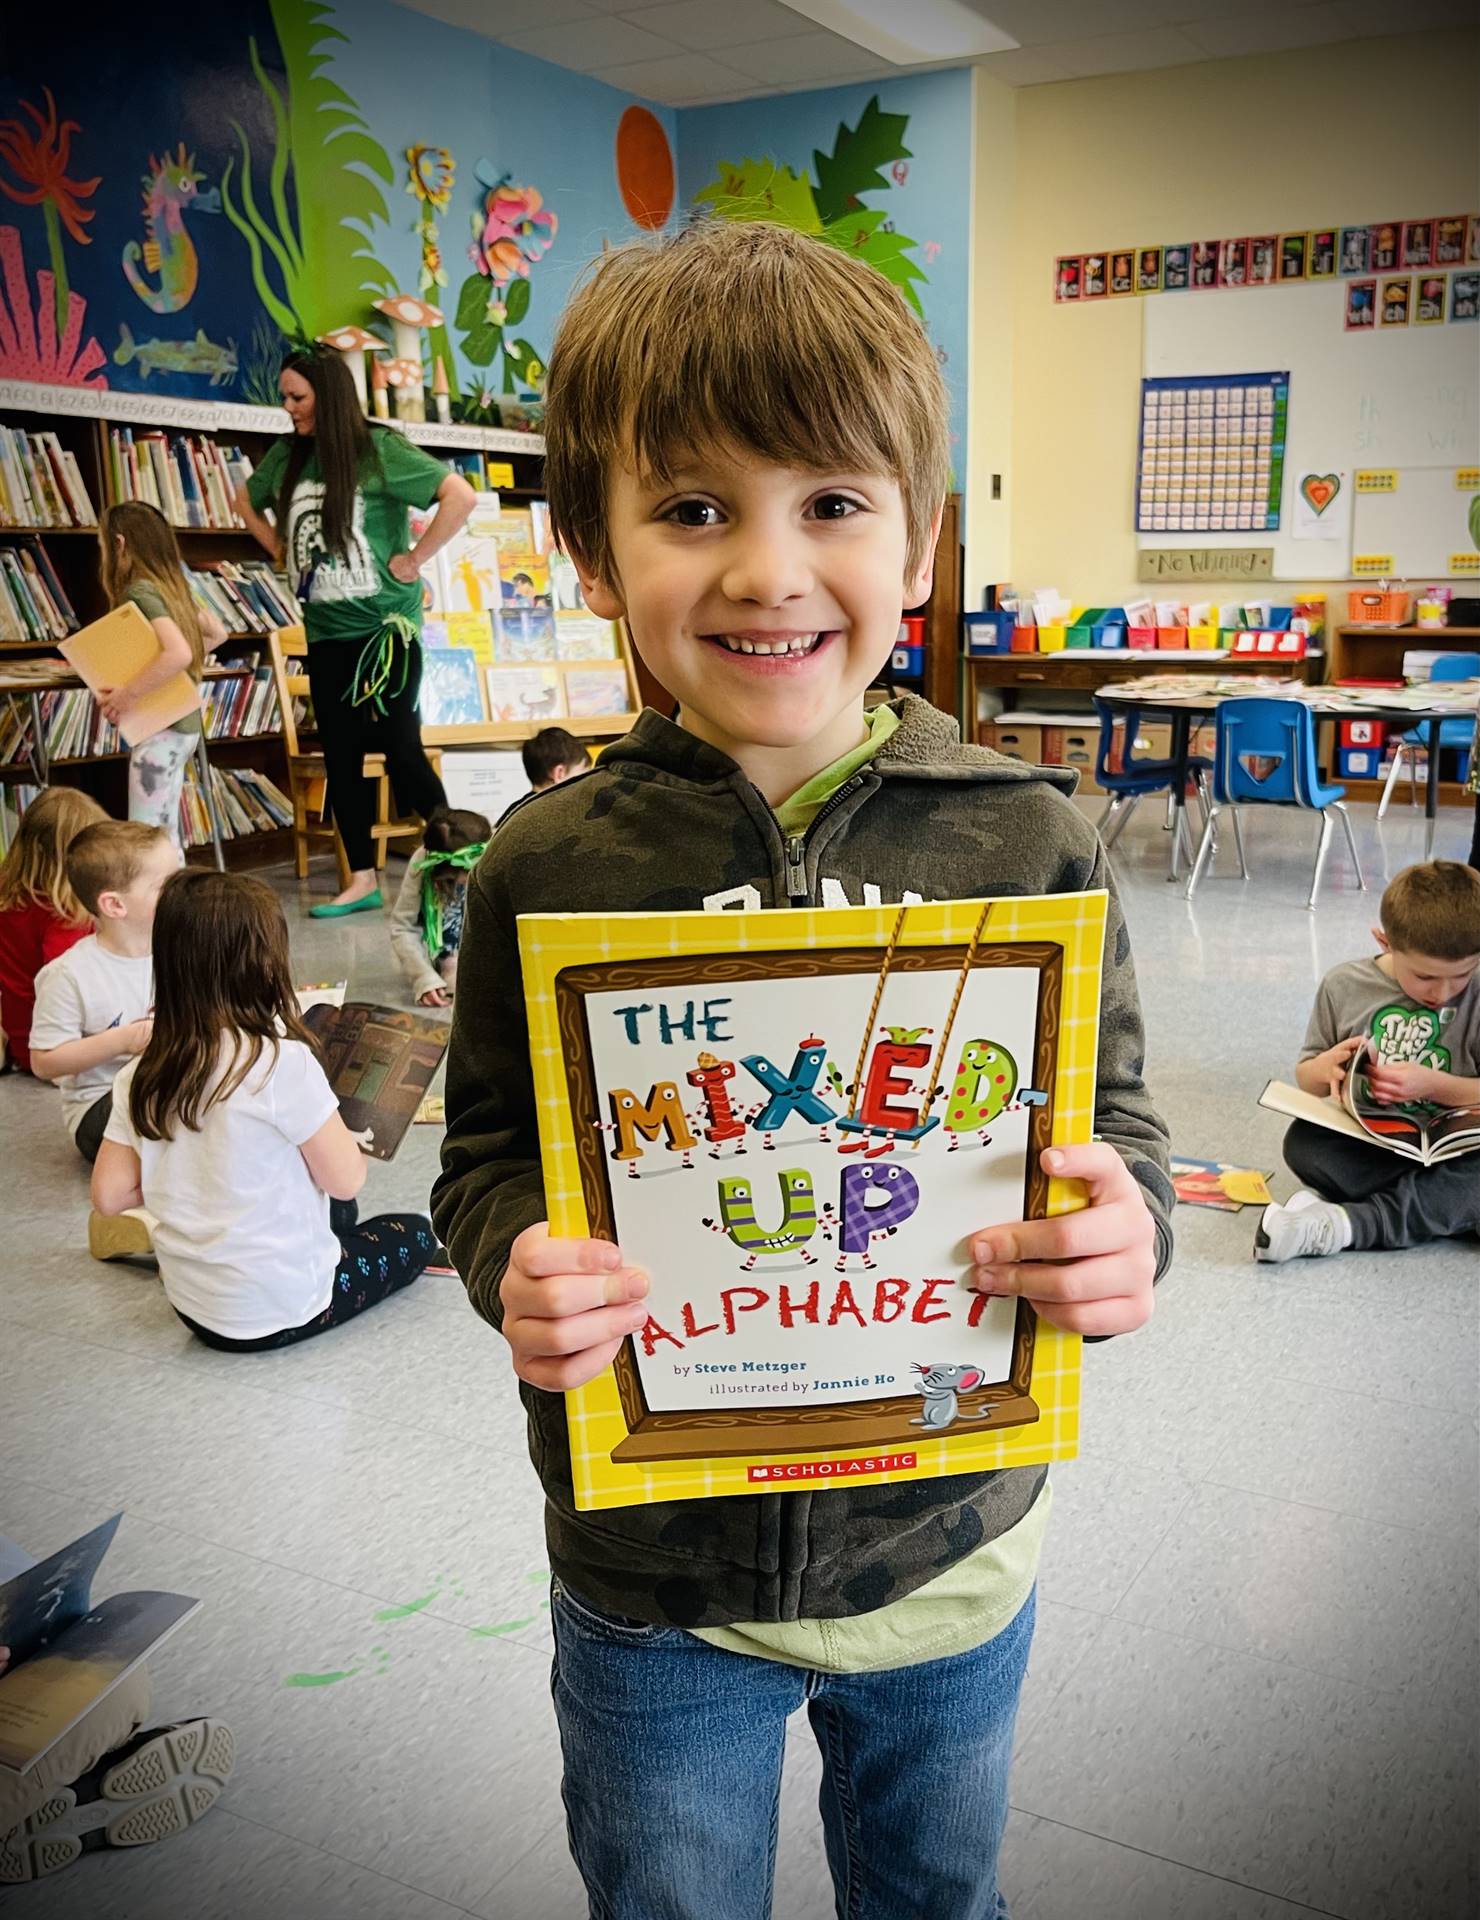 a student holds up a book, The mixed up alphabet"